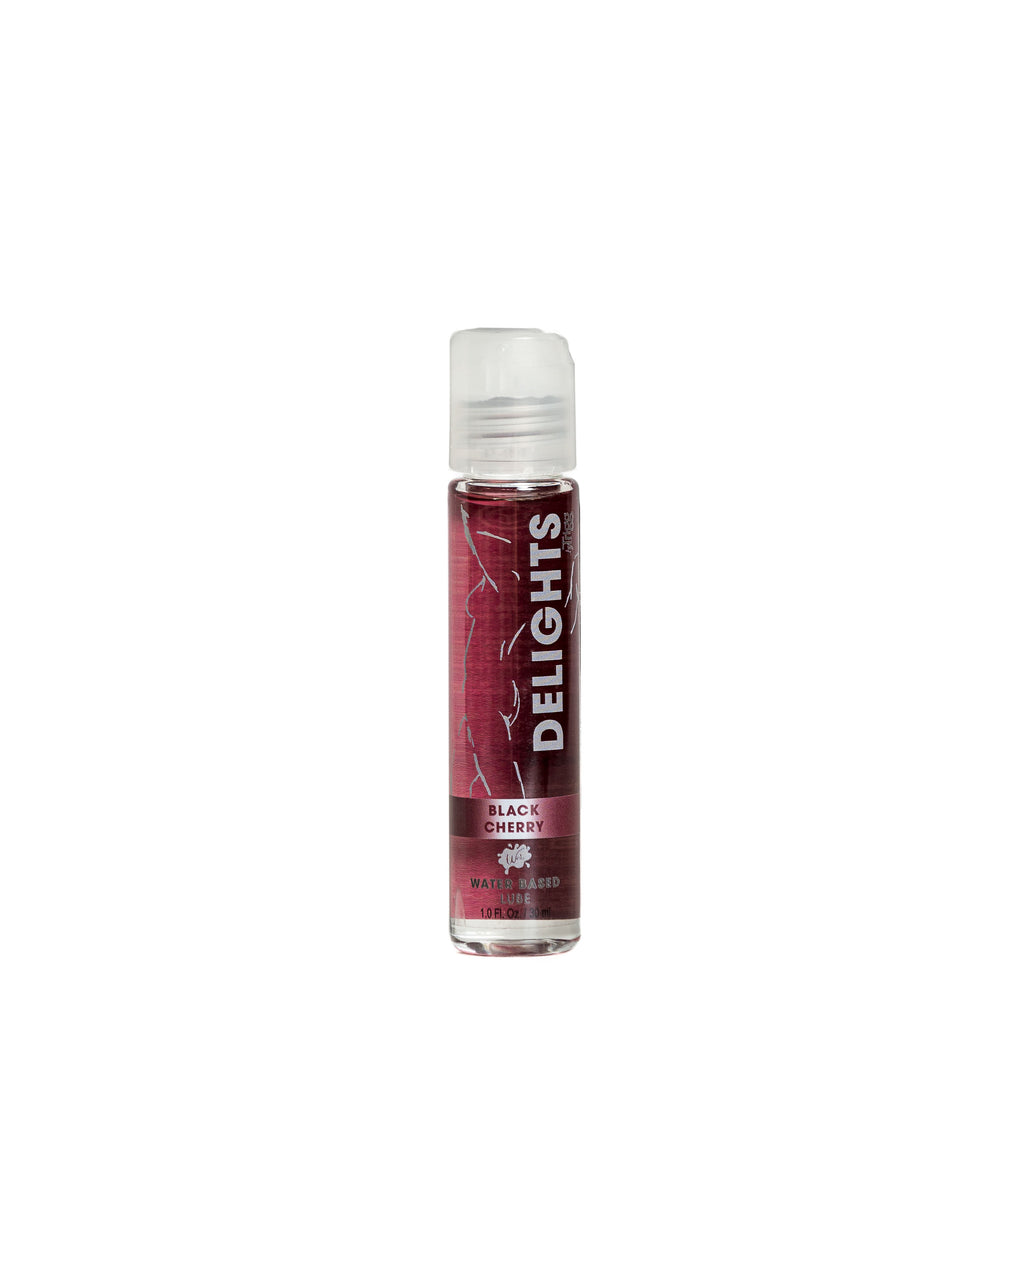 Delight Water Based - Black Cherry - Flavored Lube 1 Oz WT21527